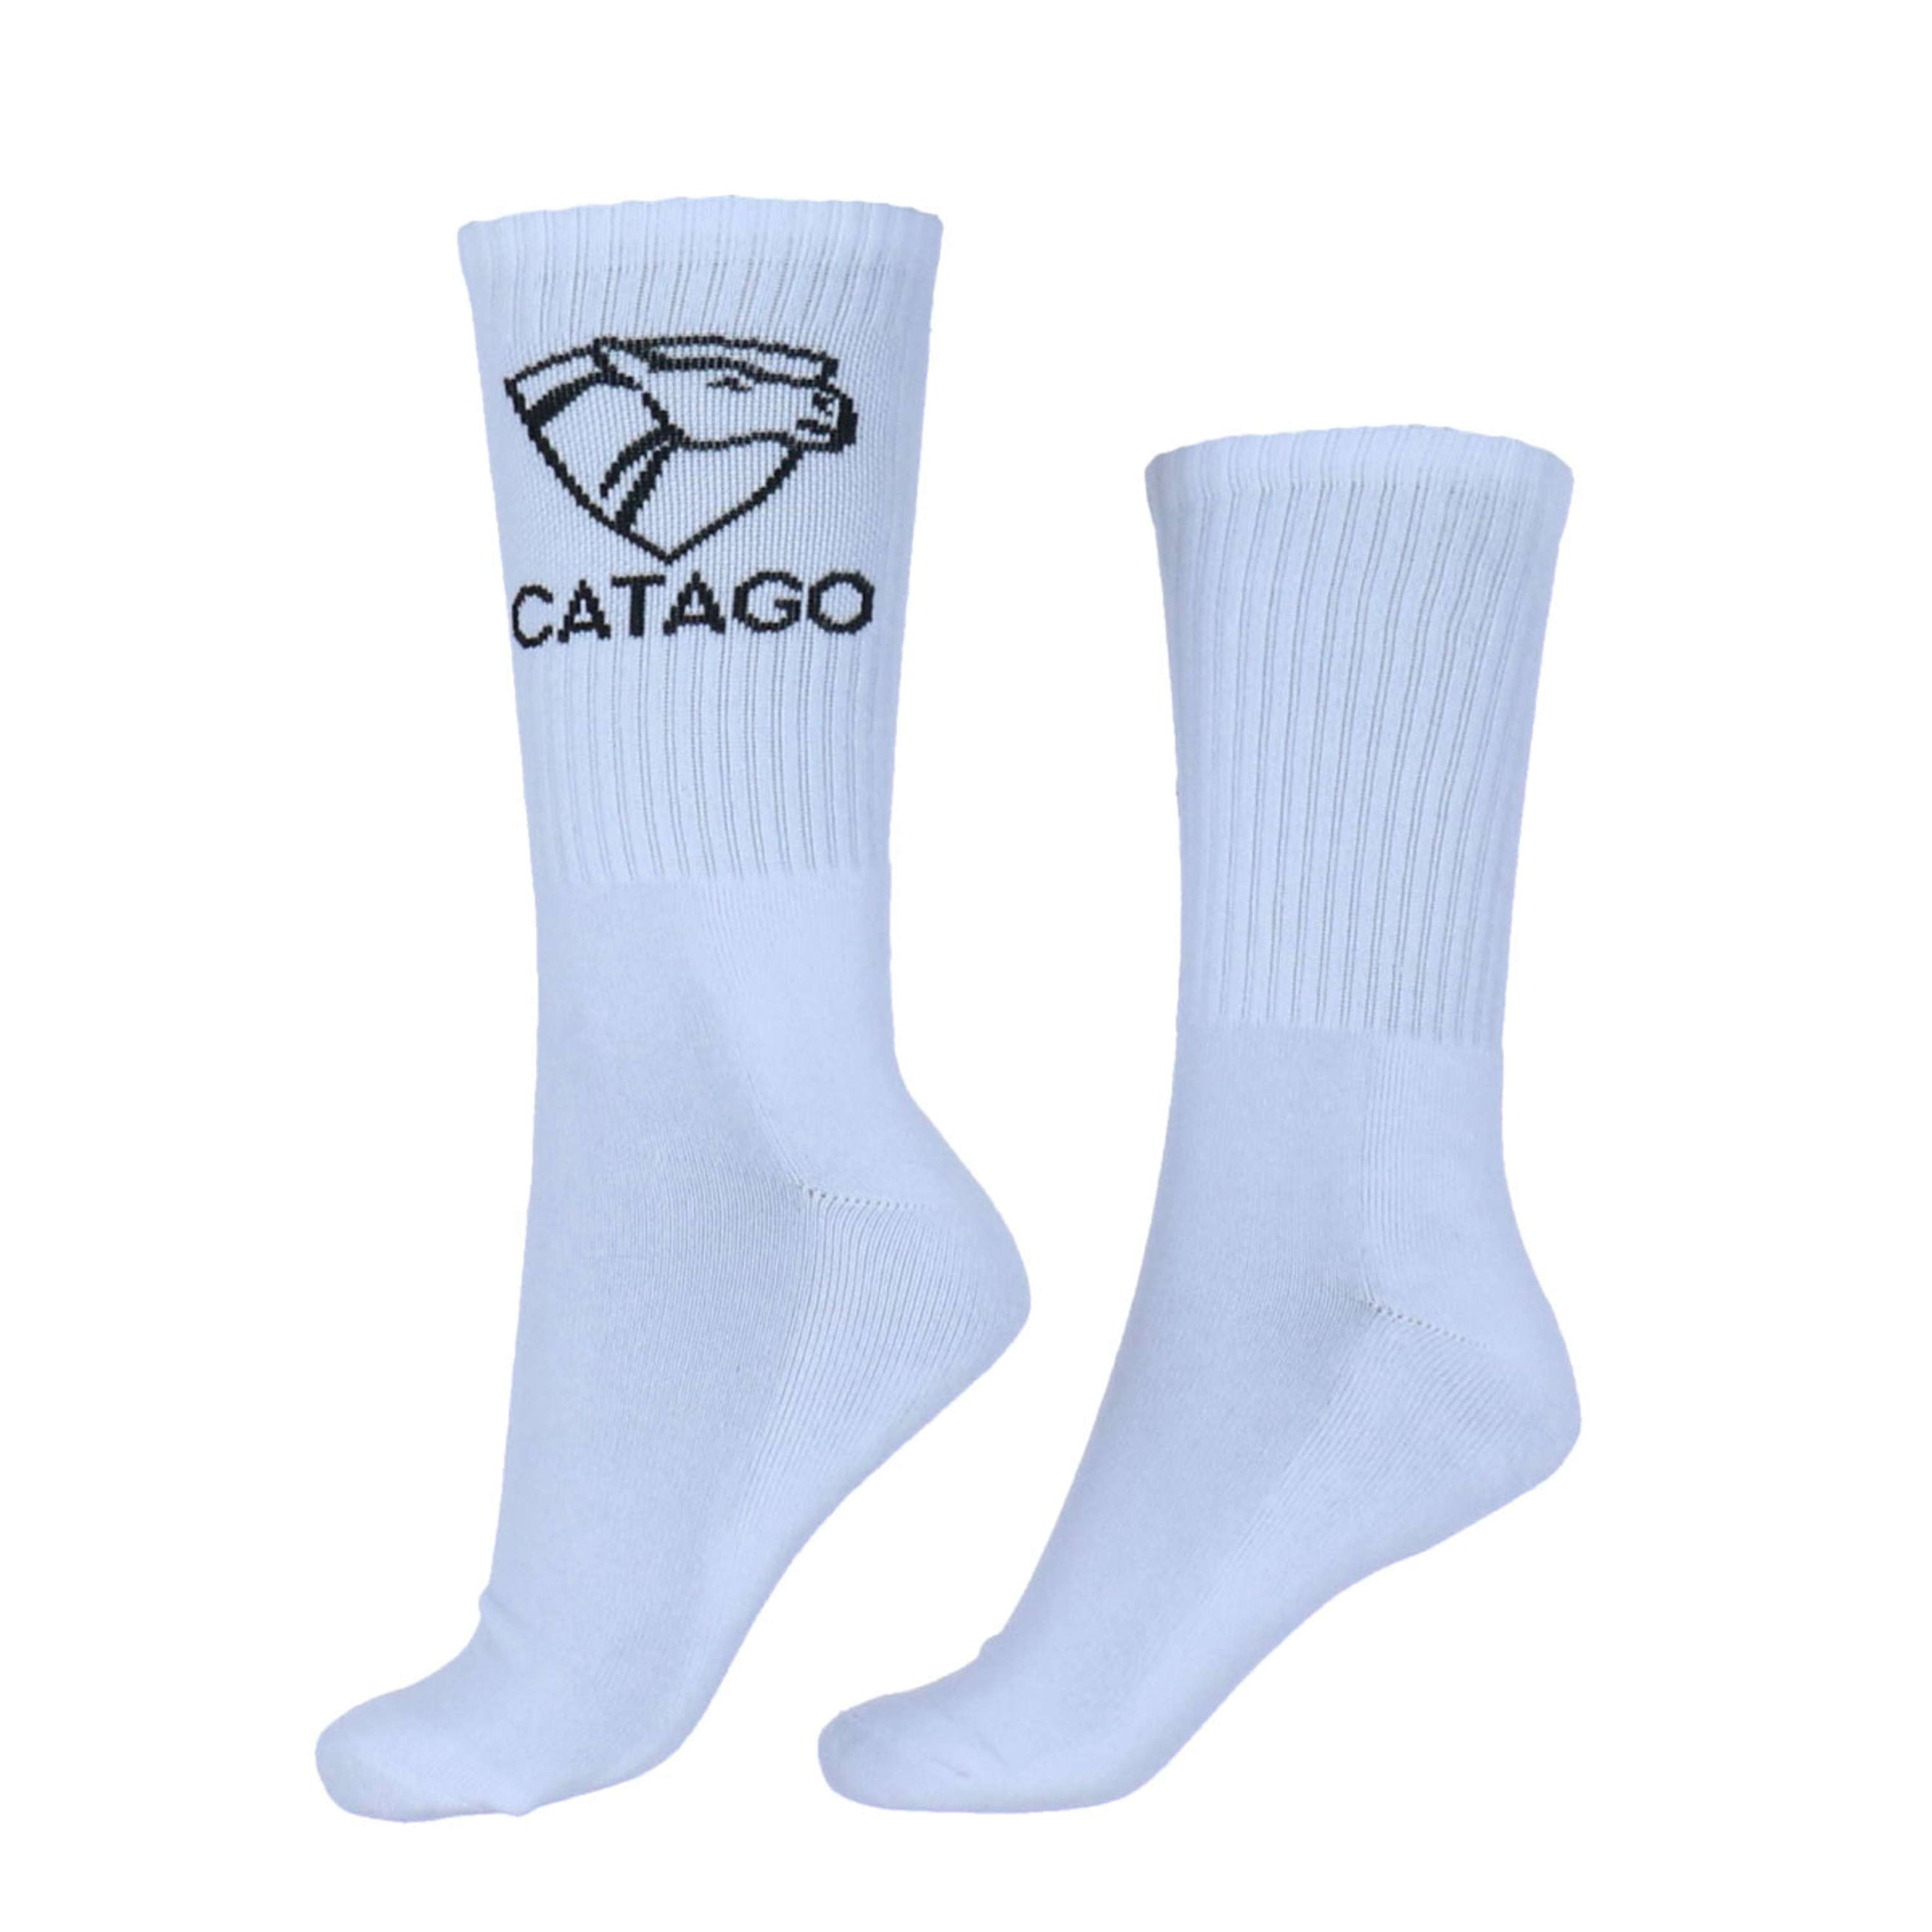 Catago Chaussettes Polly Logo Blanc